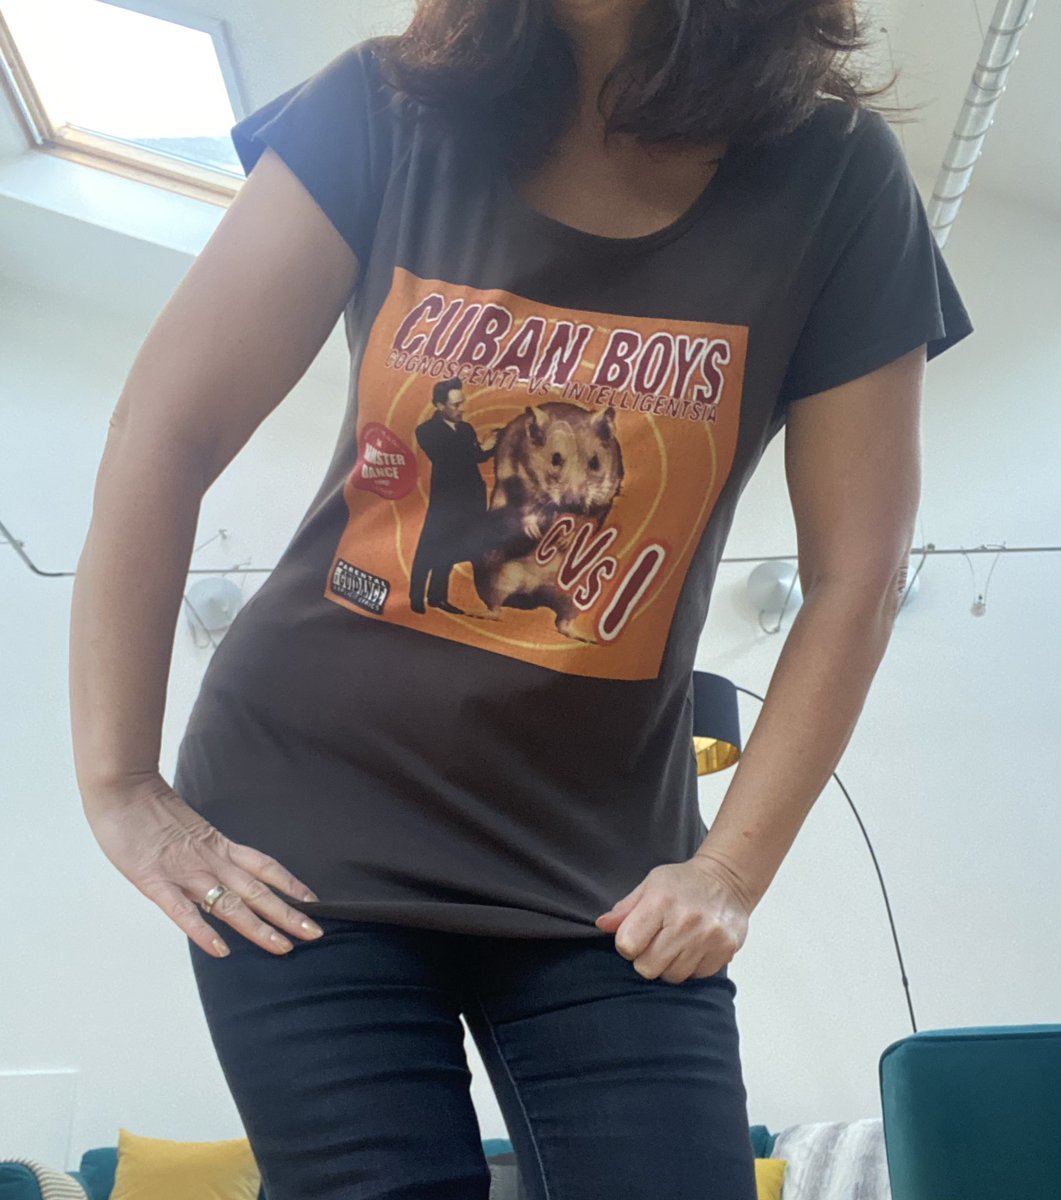 Wearing my @thecubanboys T for @BBC6Music  #TShirtDay
fingers crossed for a play. 🤞🏻 🧡